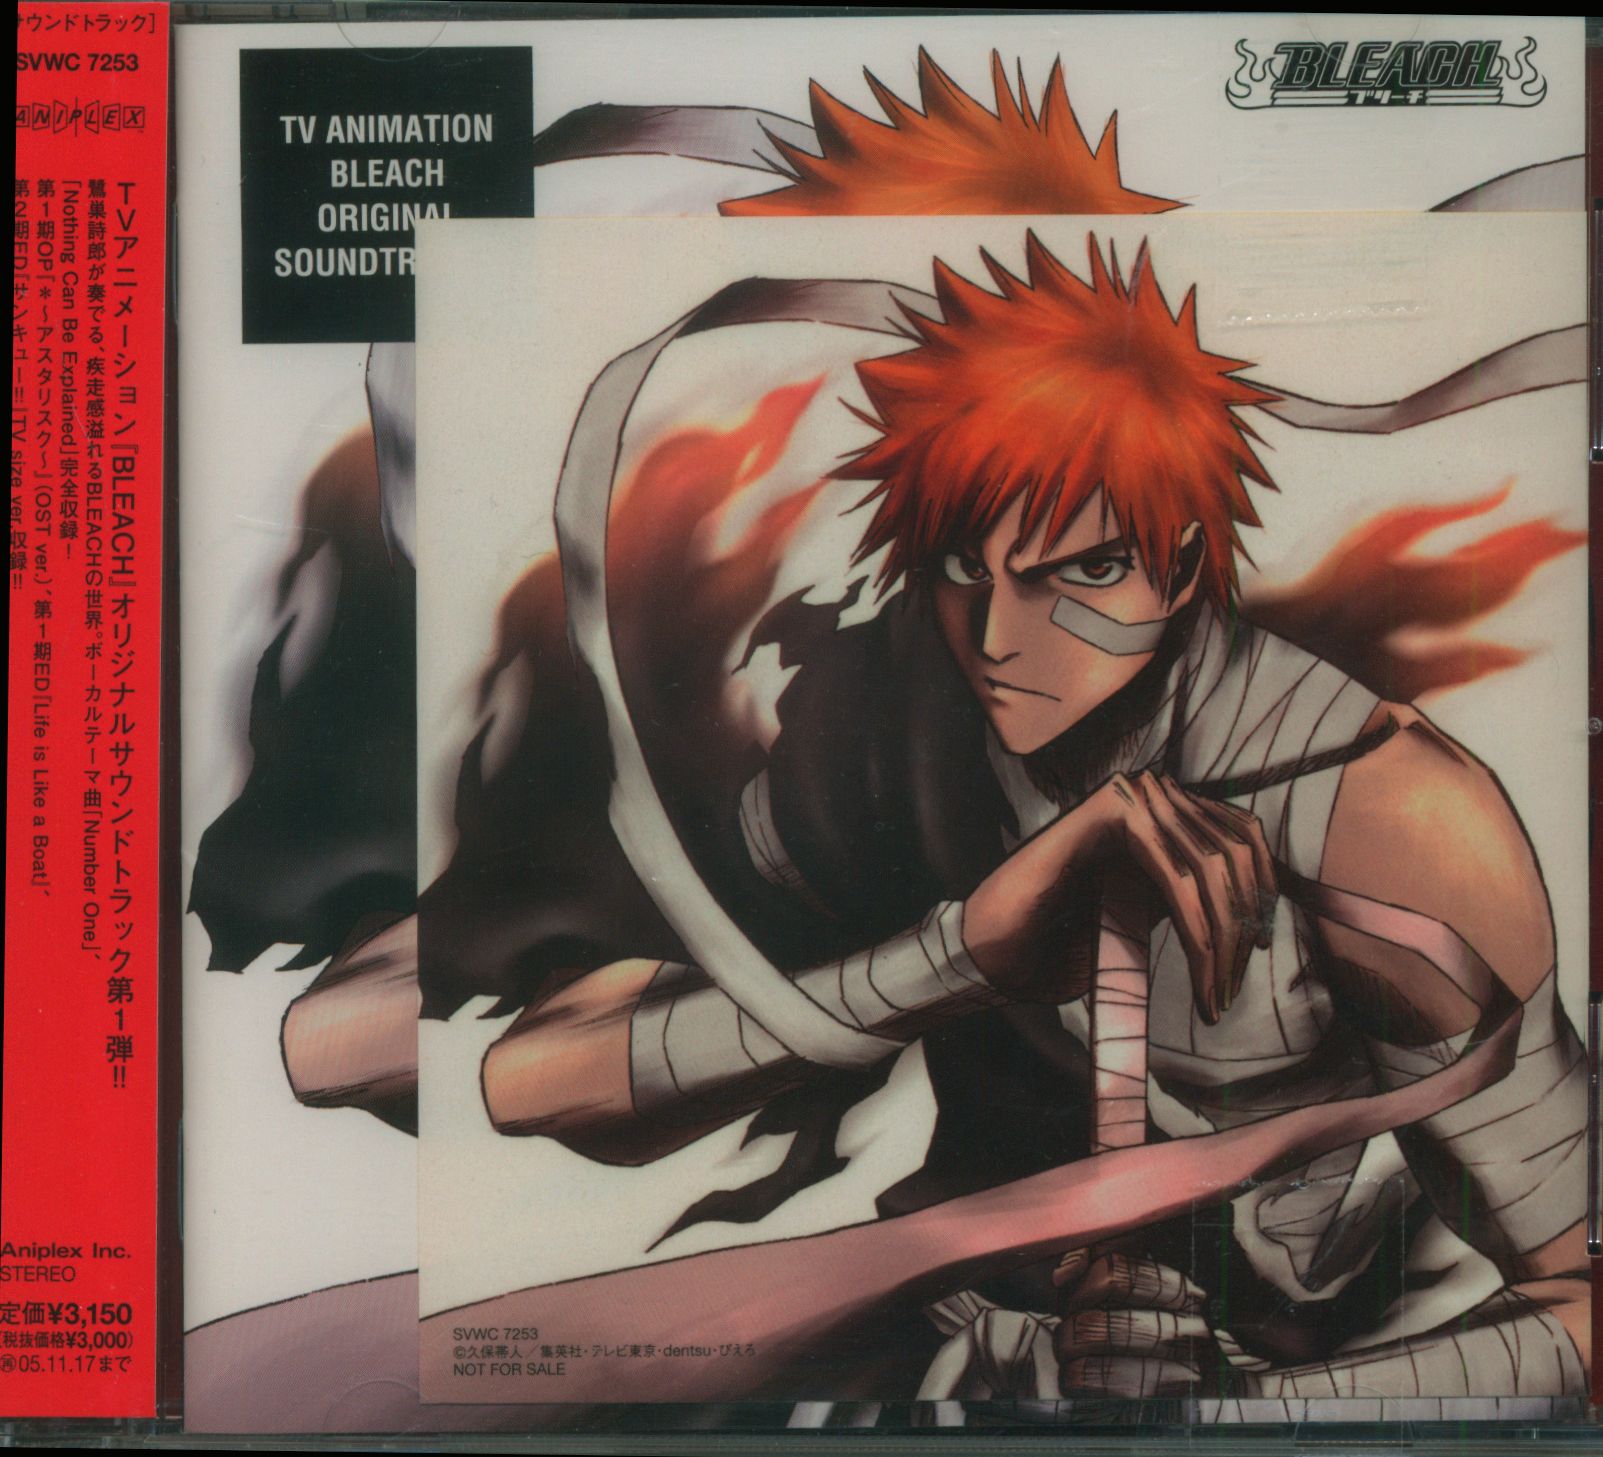 Bleach Best Tunes Art Book Soundtrack CD and DVD Japan SVWC Anime for sale  online